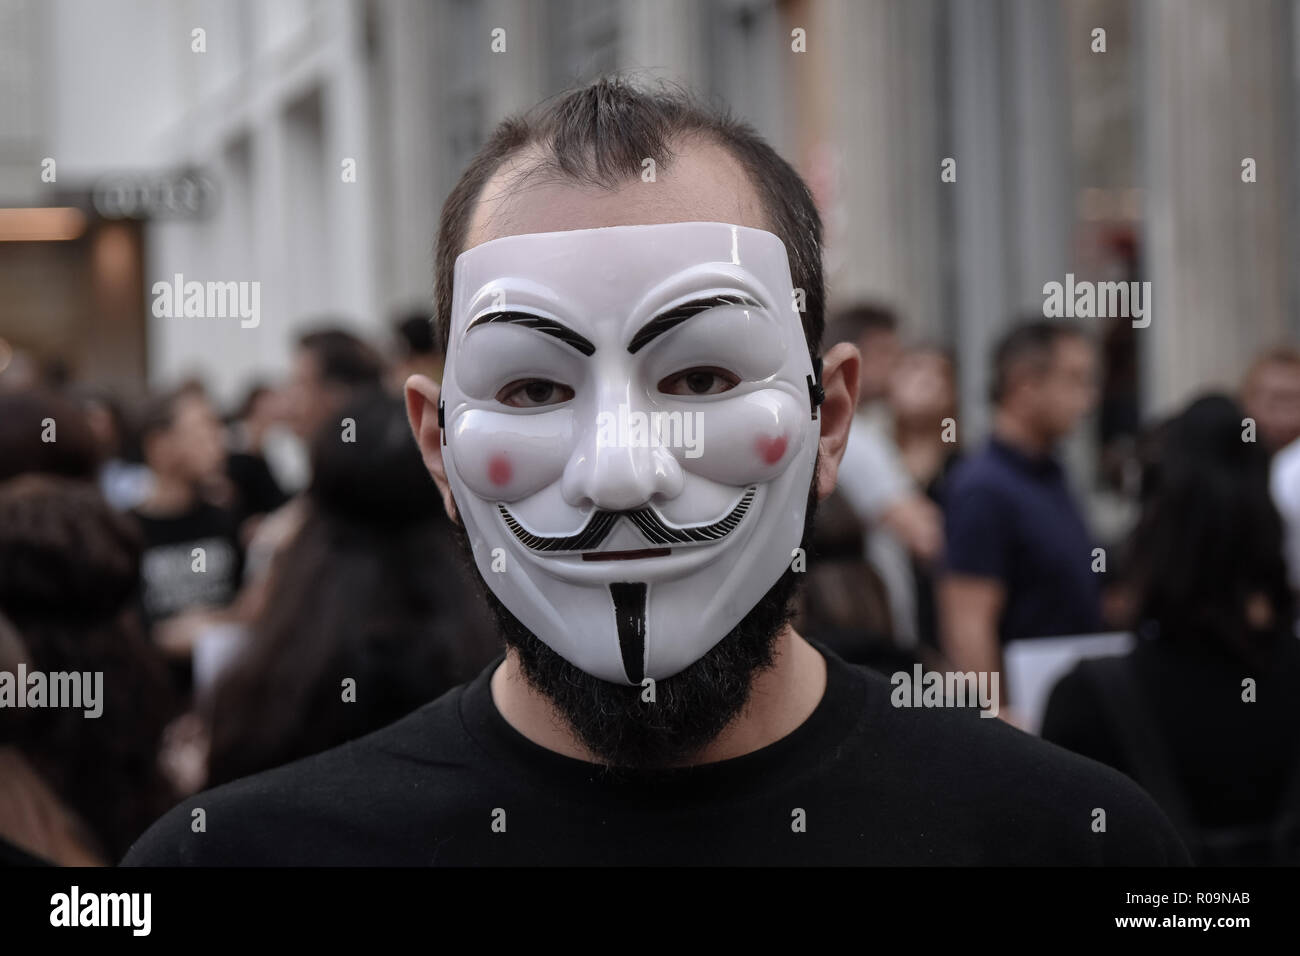 A participant seen standing wearing anonymous mask during the protest.  Anonymous is a vegan activists group wearing black clothes while holding  laptops and placards as they demonstrate against exploitation of animals,  The